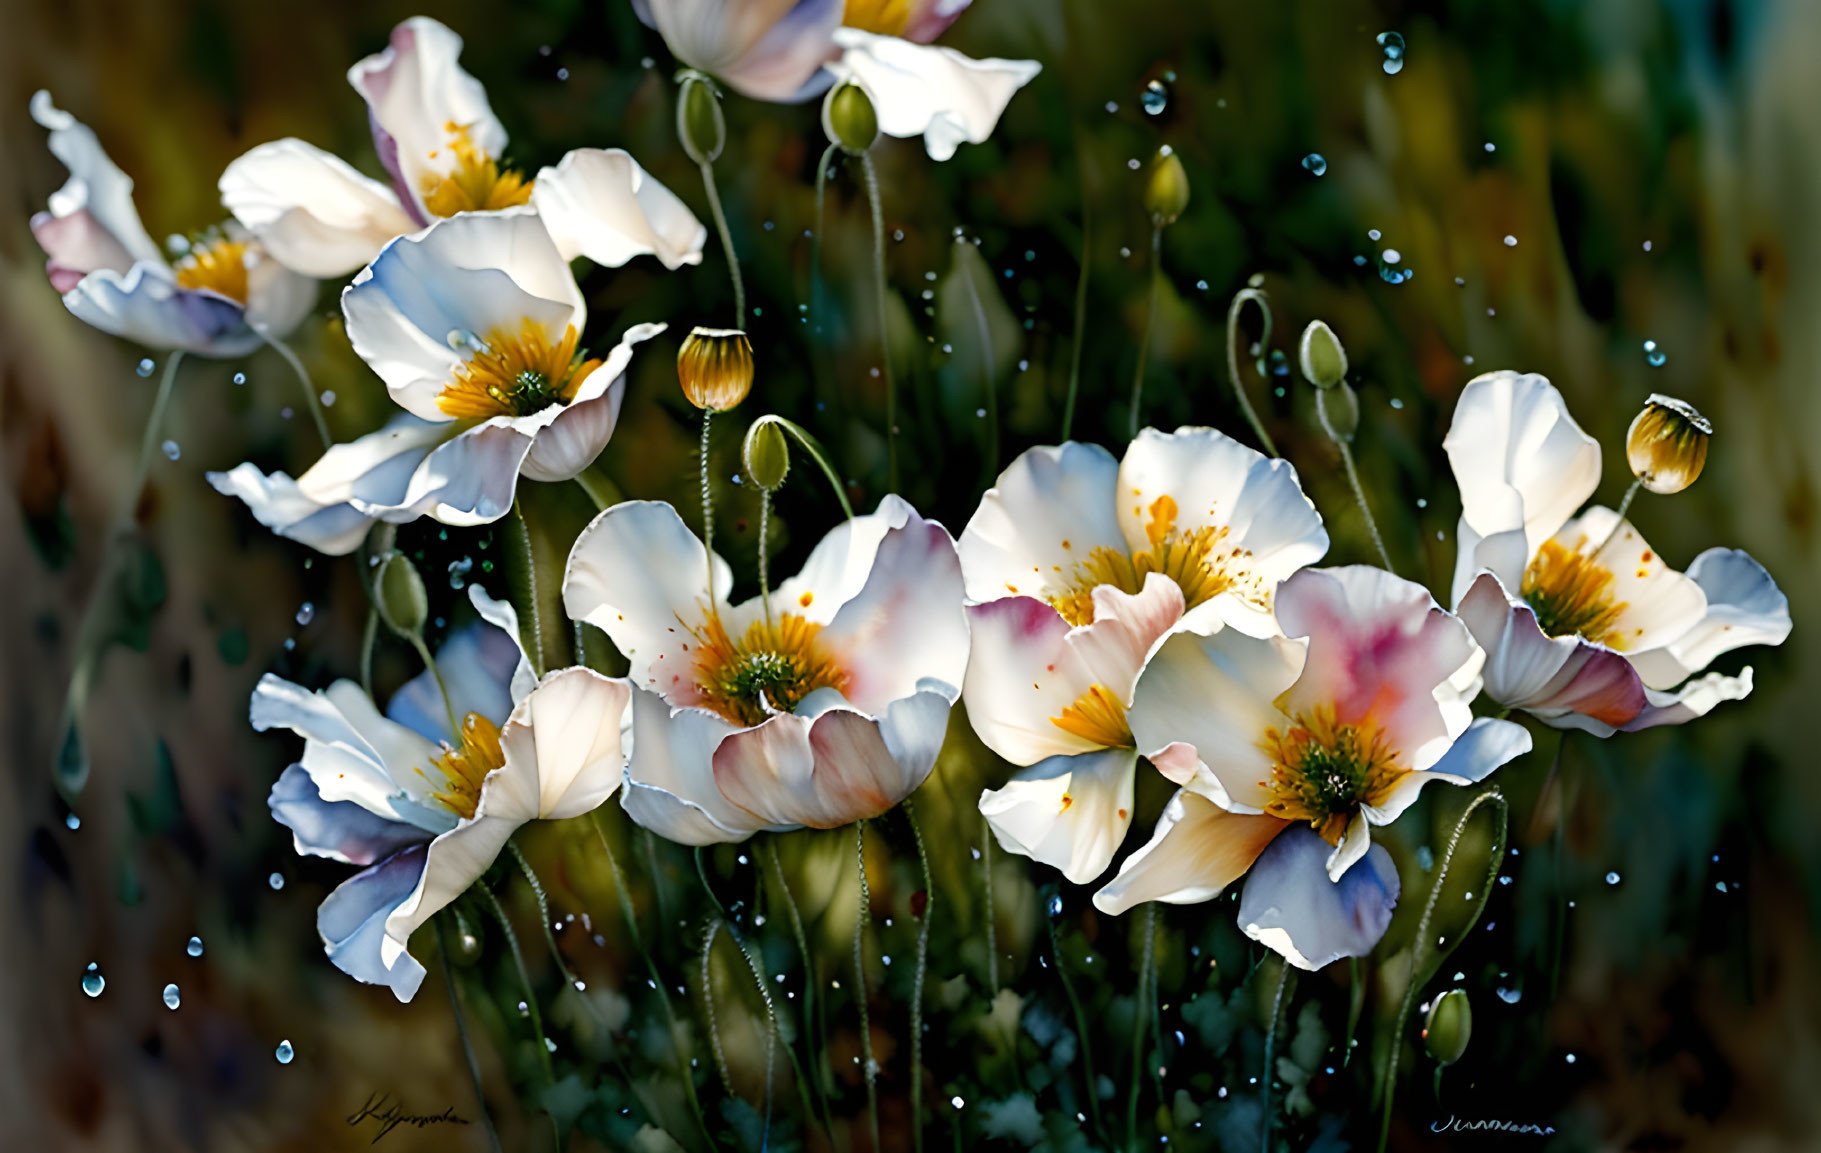 White Poppies with Yellow Centers and Dew Drops on Petals and Buds in Soft Bokeh